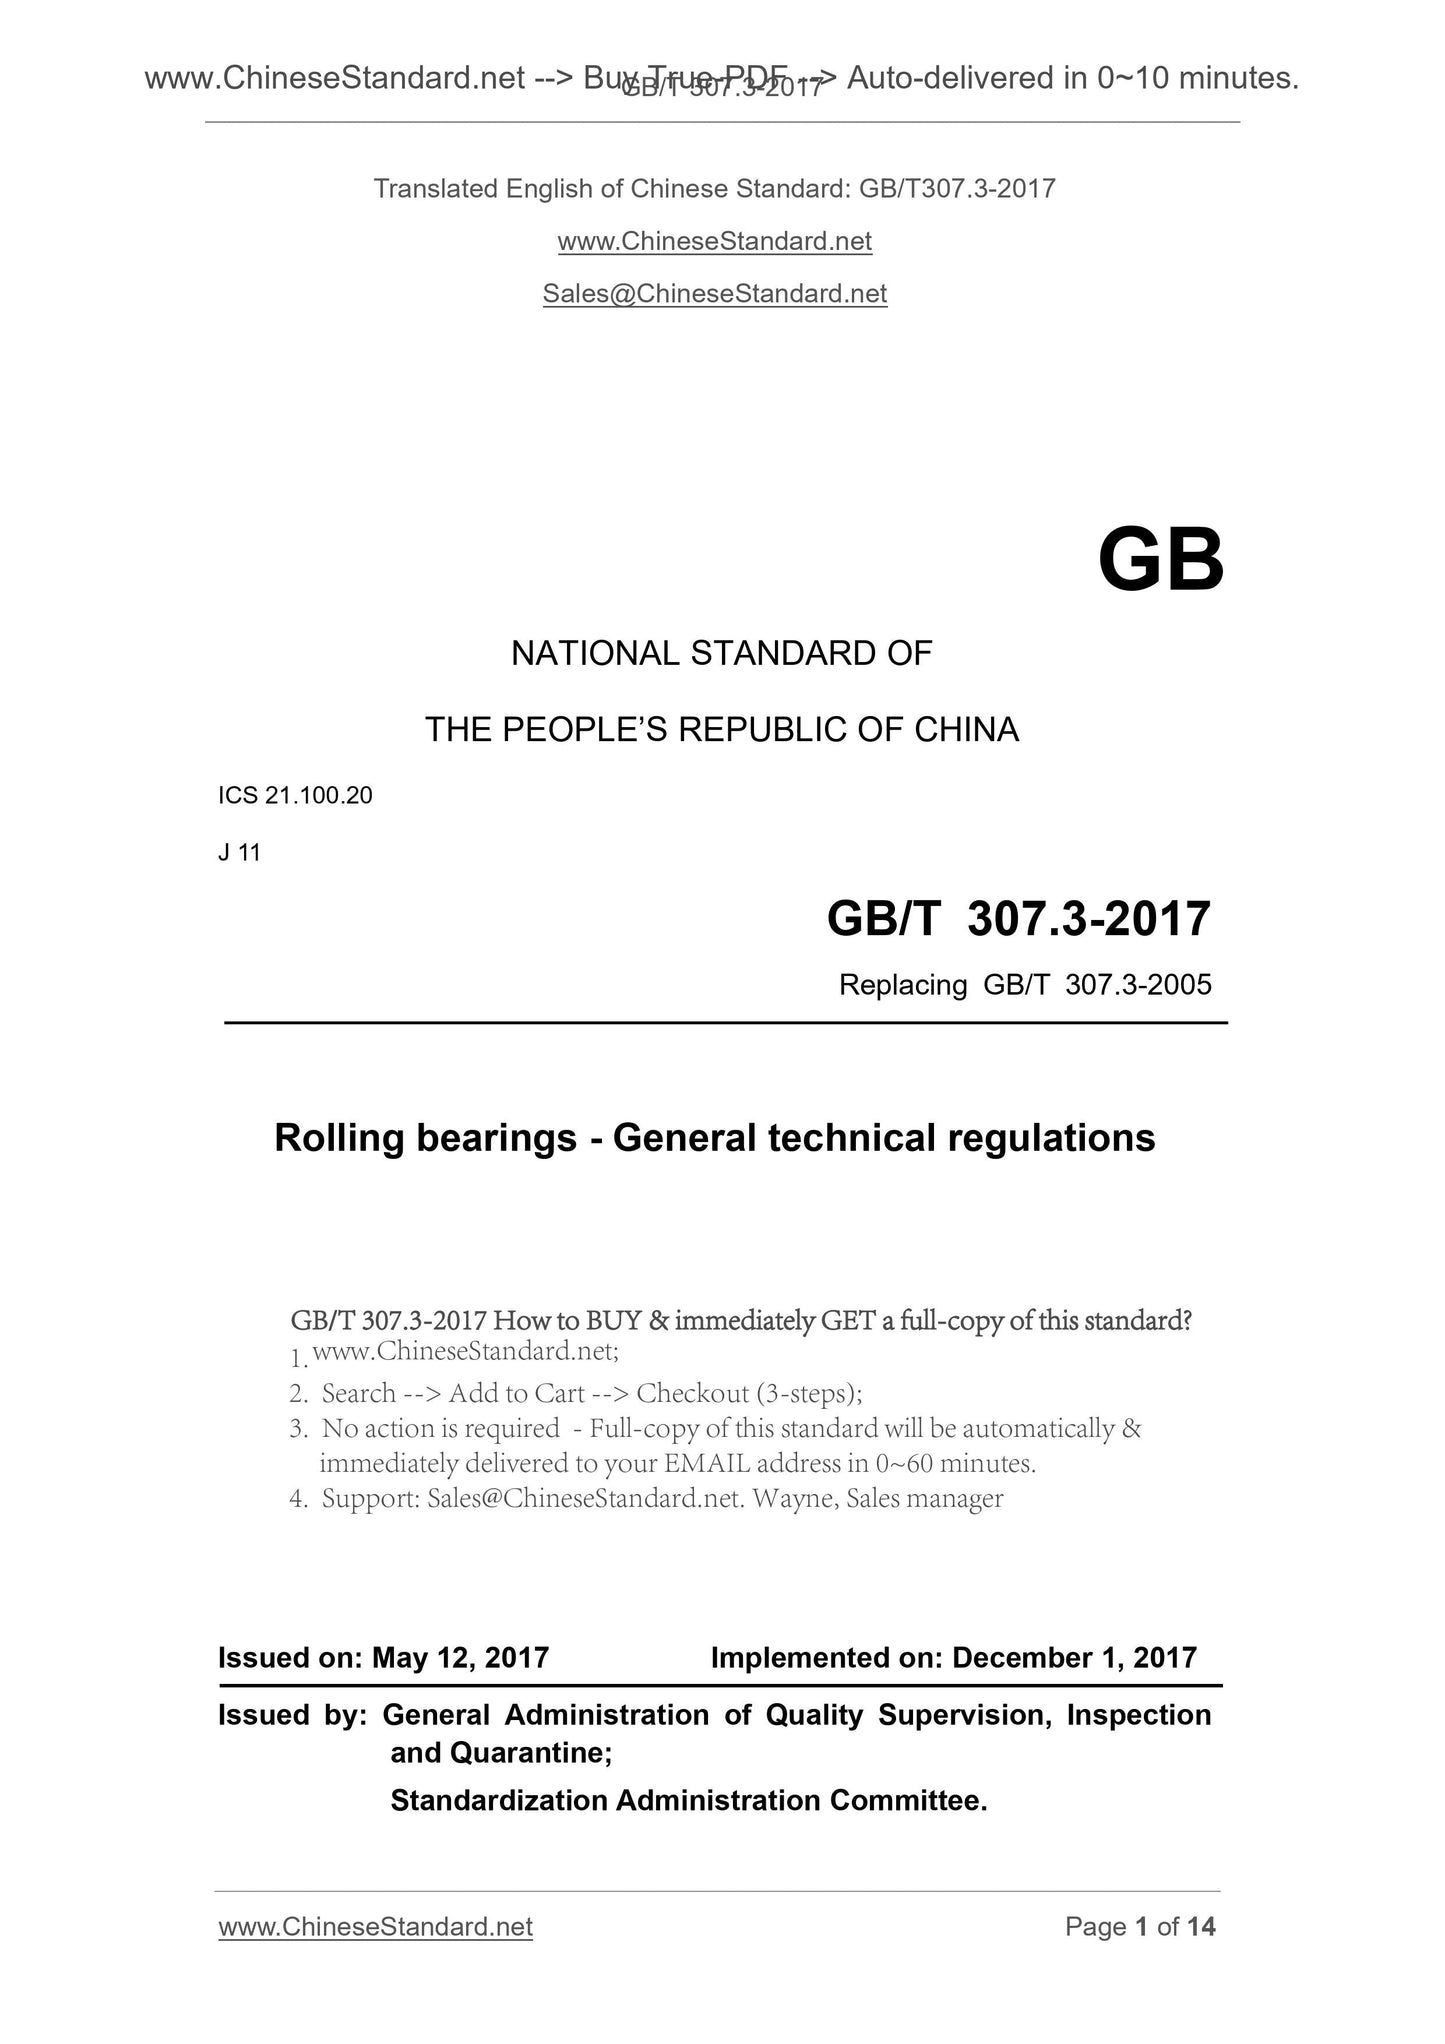 GB/T 307.3-2017 Page 1